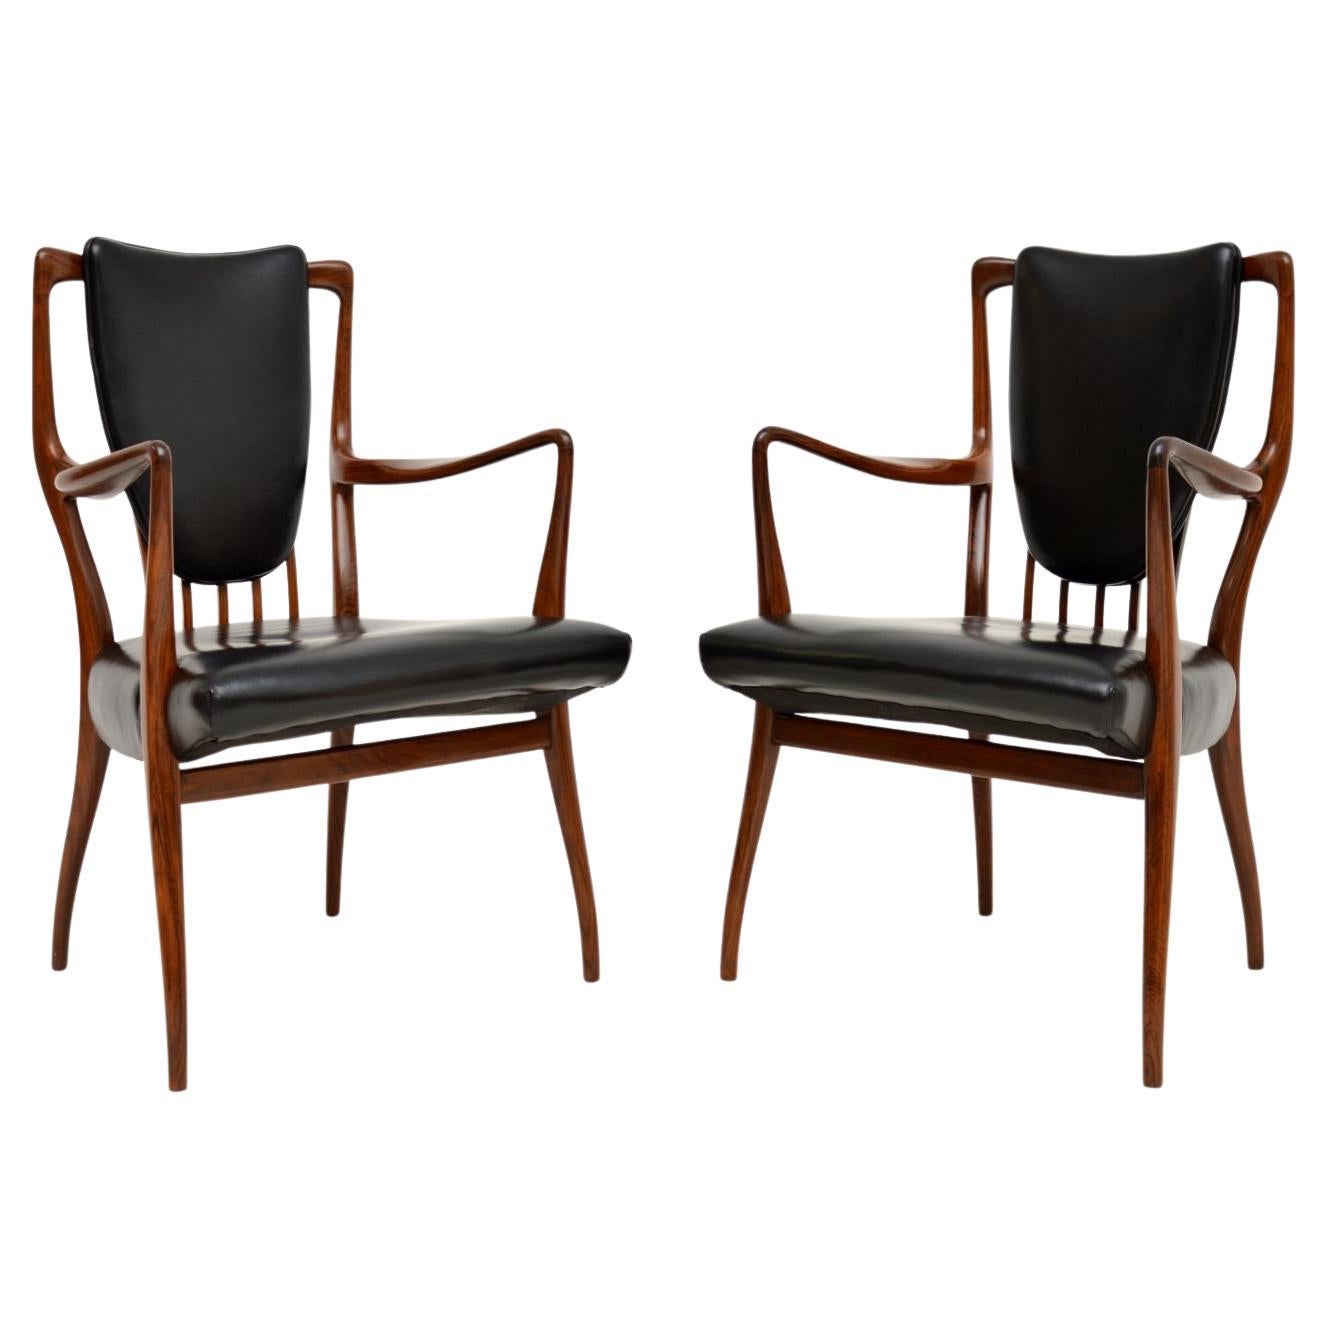 1950s Pair of Carver Armchairs by Andrew Milne